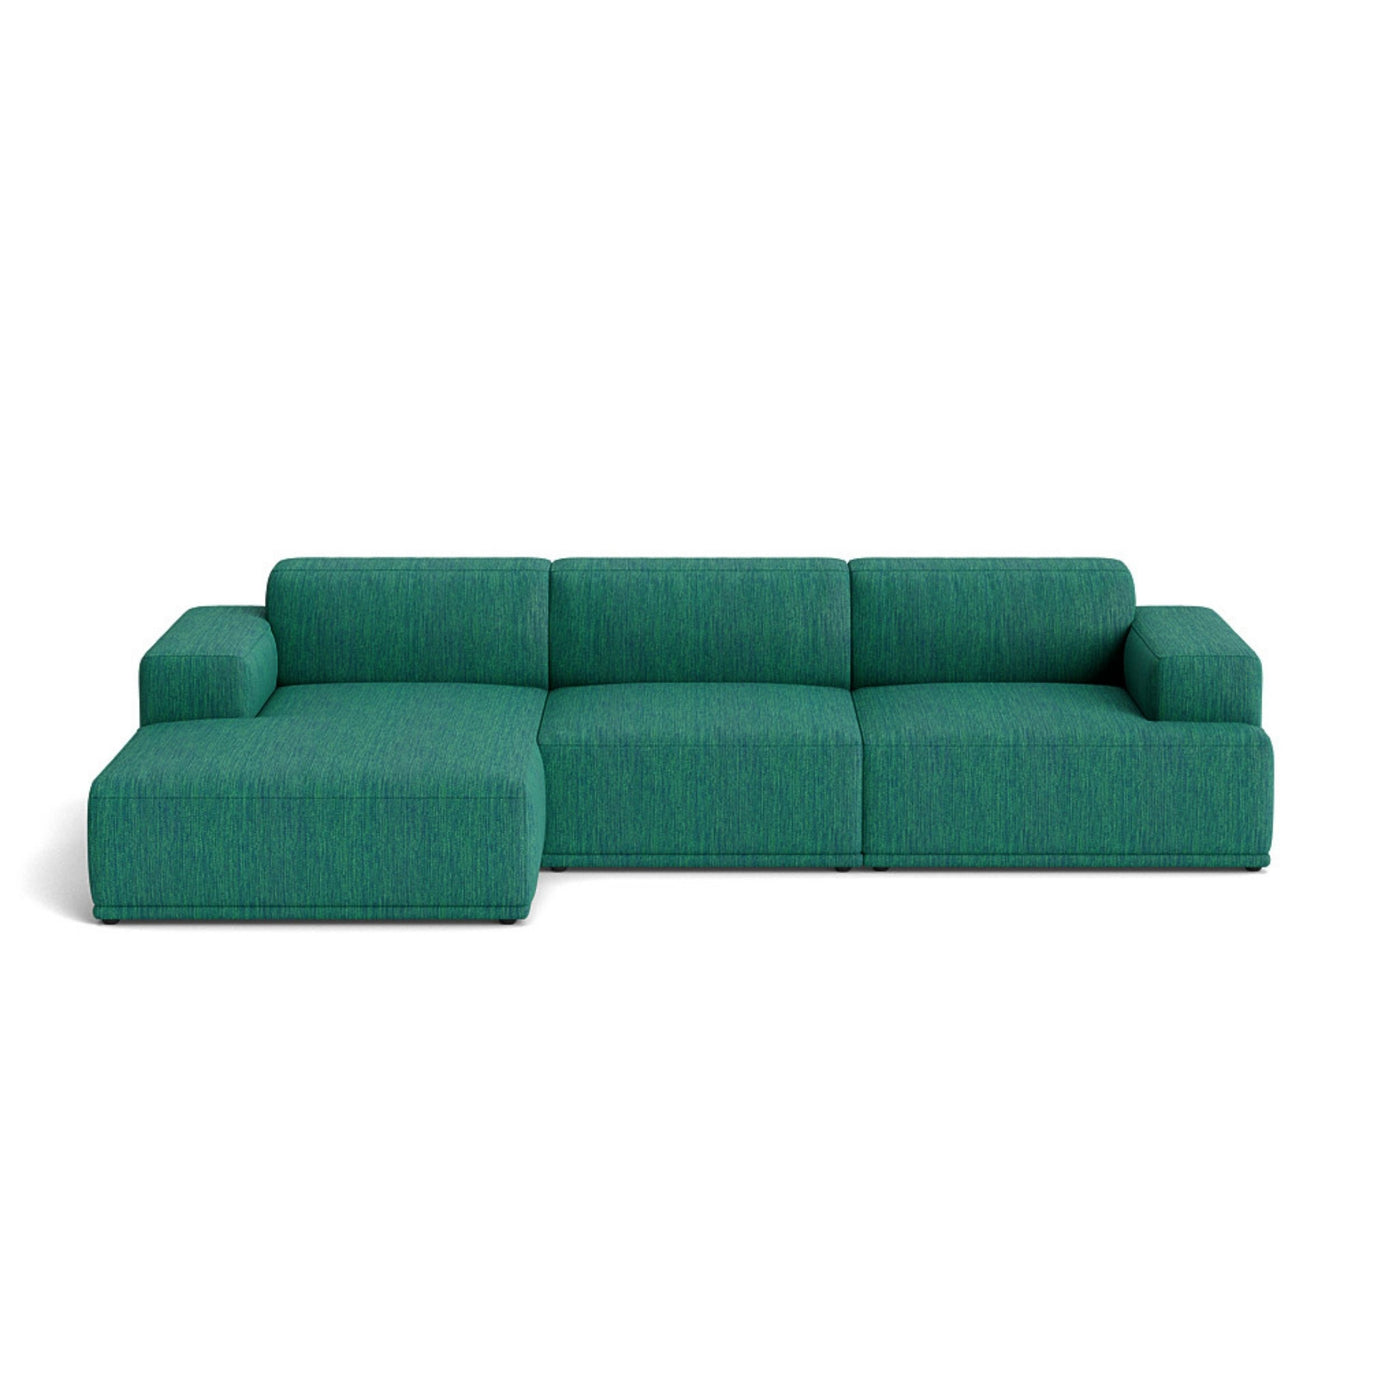 Muuto Connect Soft Modular 3 Seater Sofa, configuration 3. Made-to-order from someday designs. #colour_balder-862